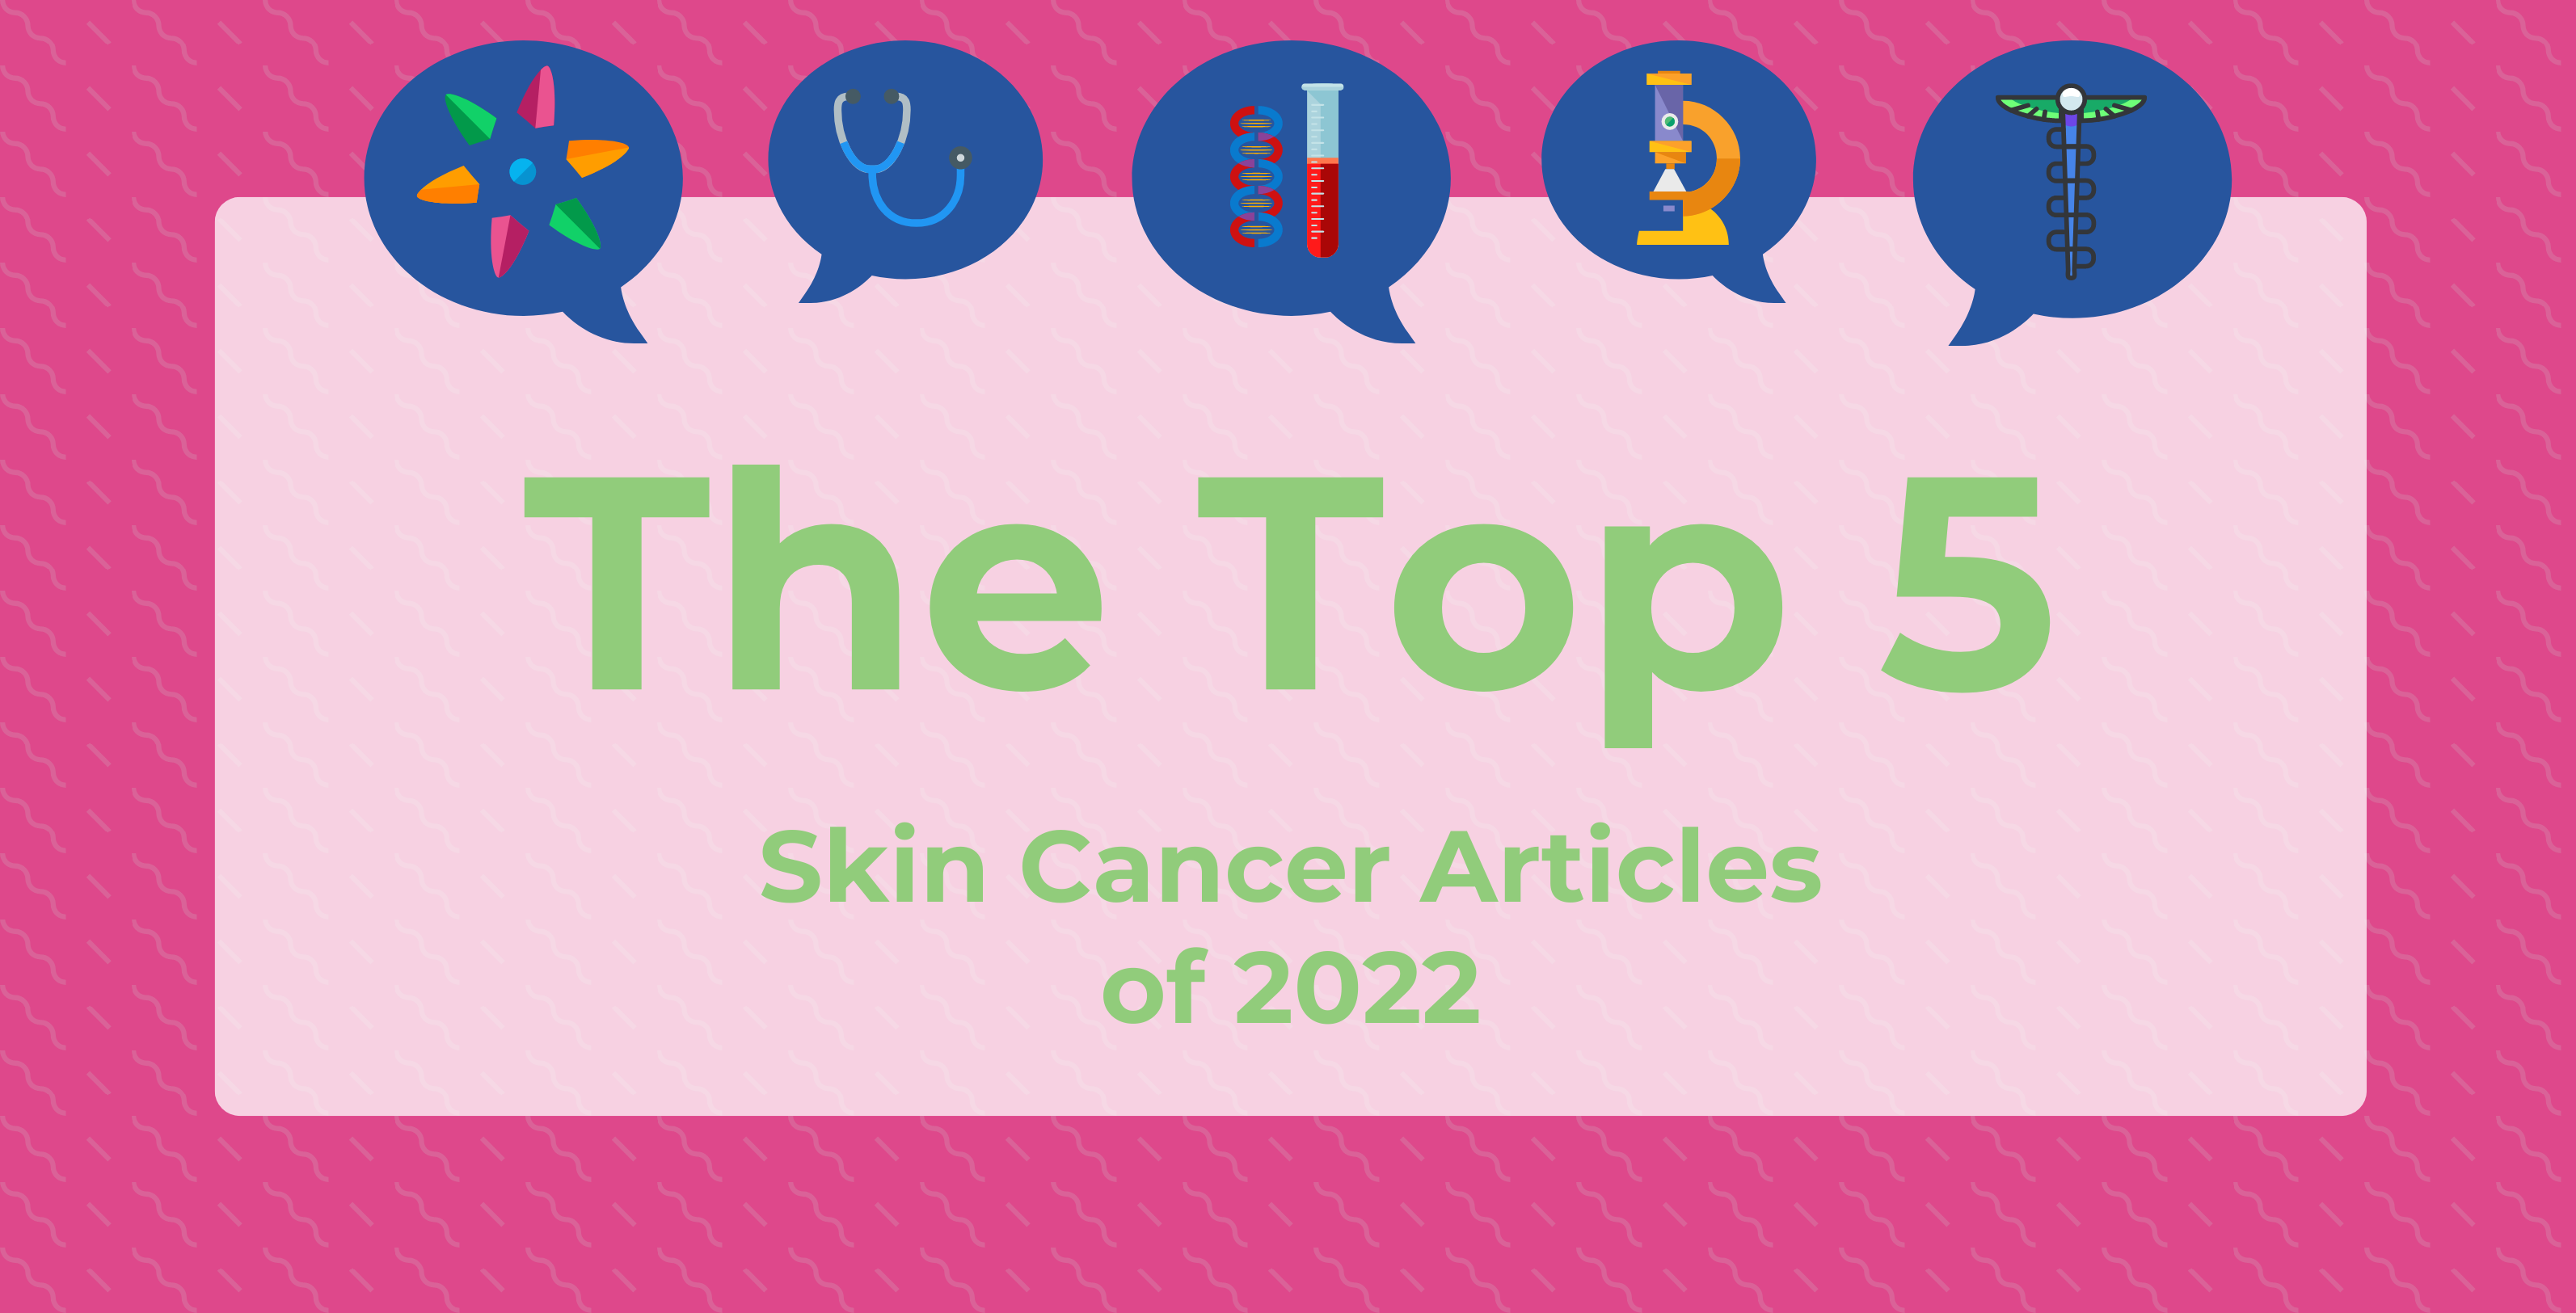 Graphic representing the top 5 skin cancer articles for 2022